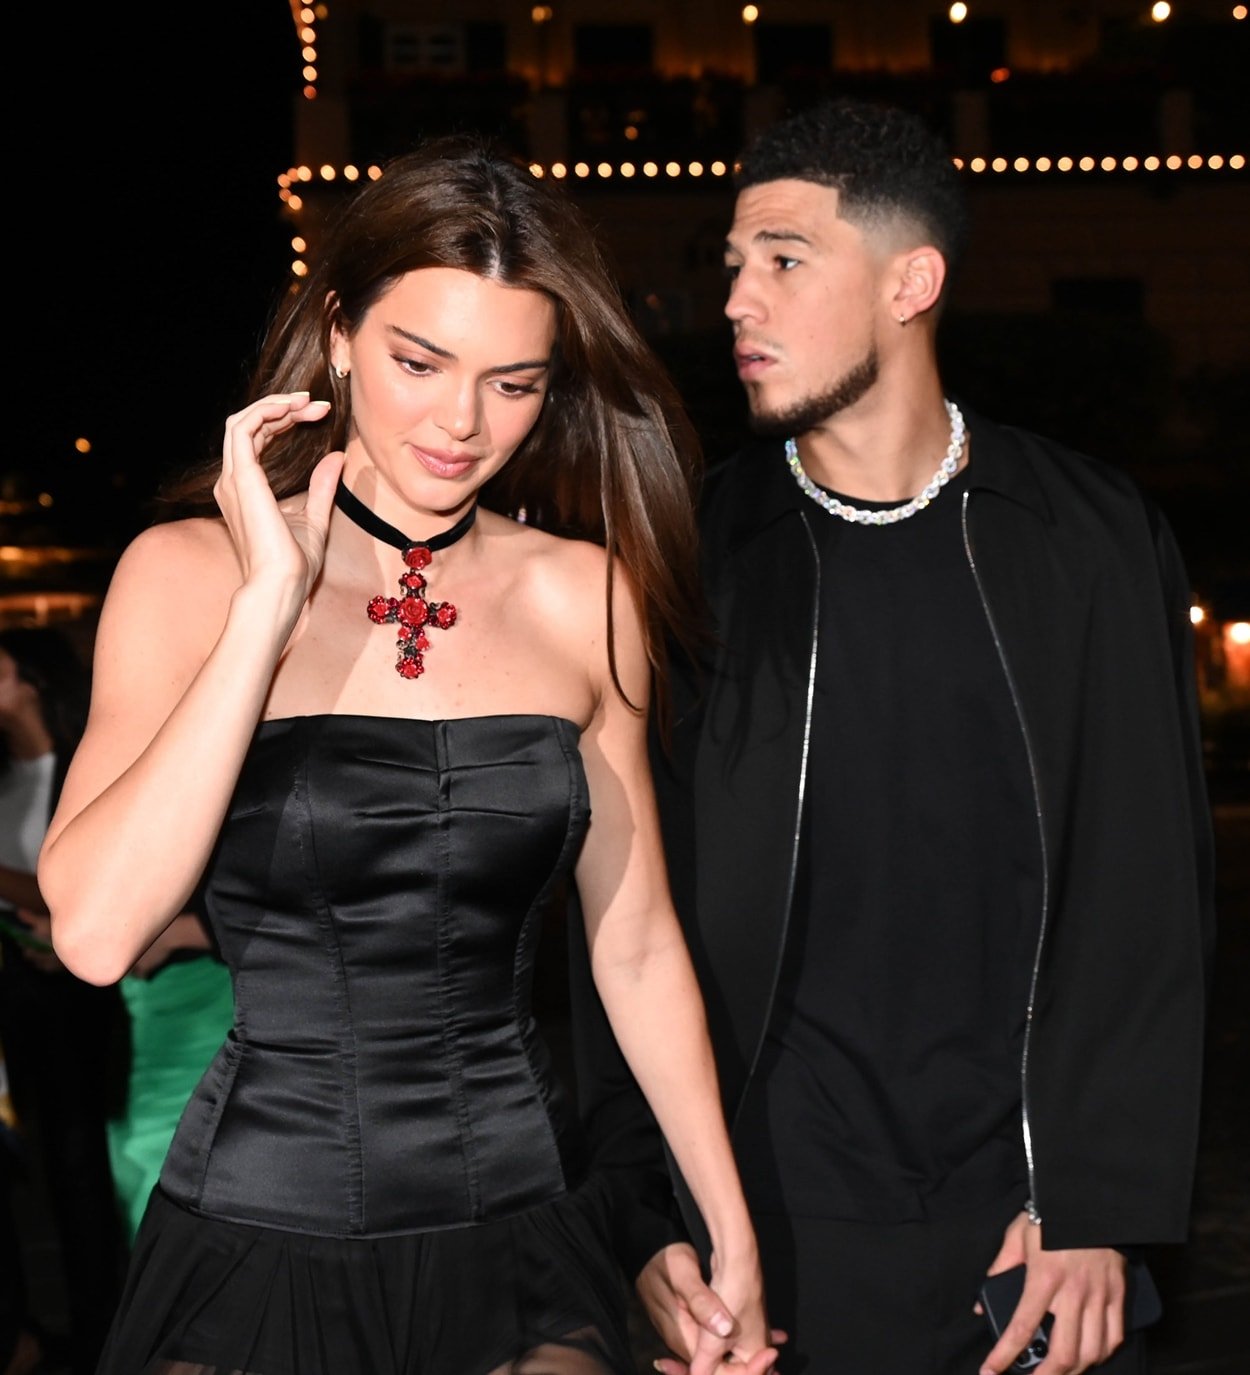 Kendall Jenner in a Dolce & Gabbana Spring 1995 dress styled with a Dolce & Gabbana rose crucifix steps out for dinner with her boyfriend Devin Booker